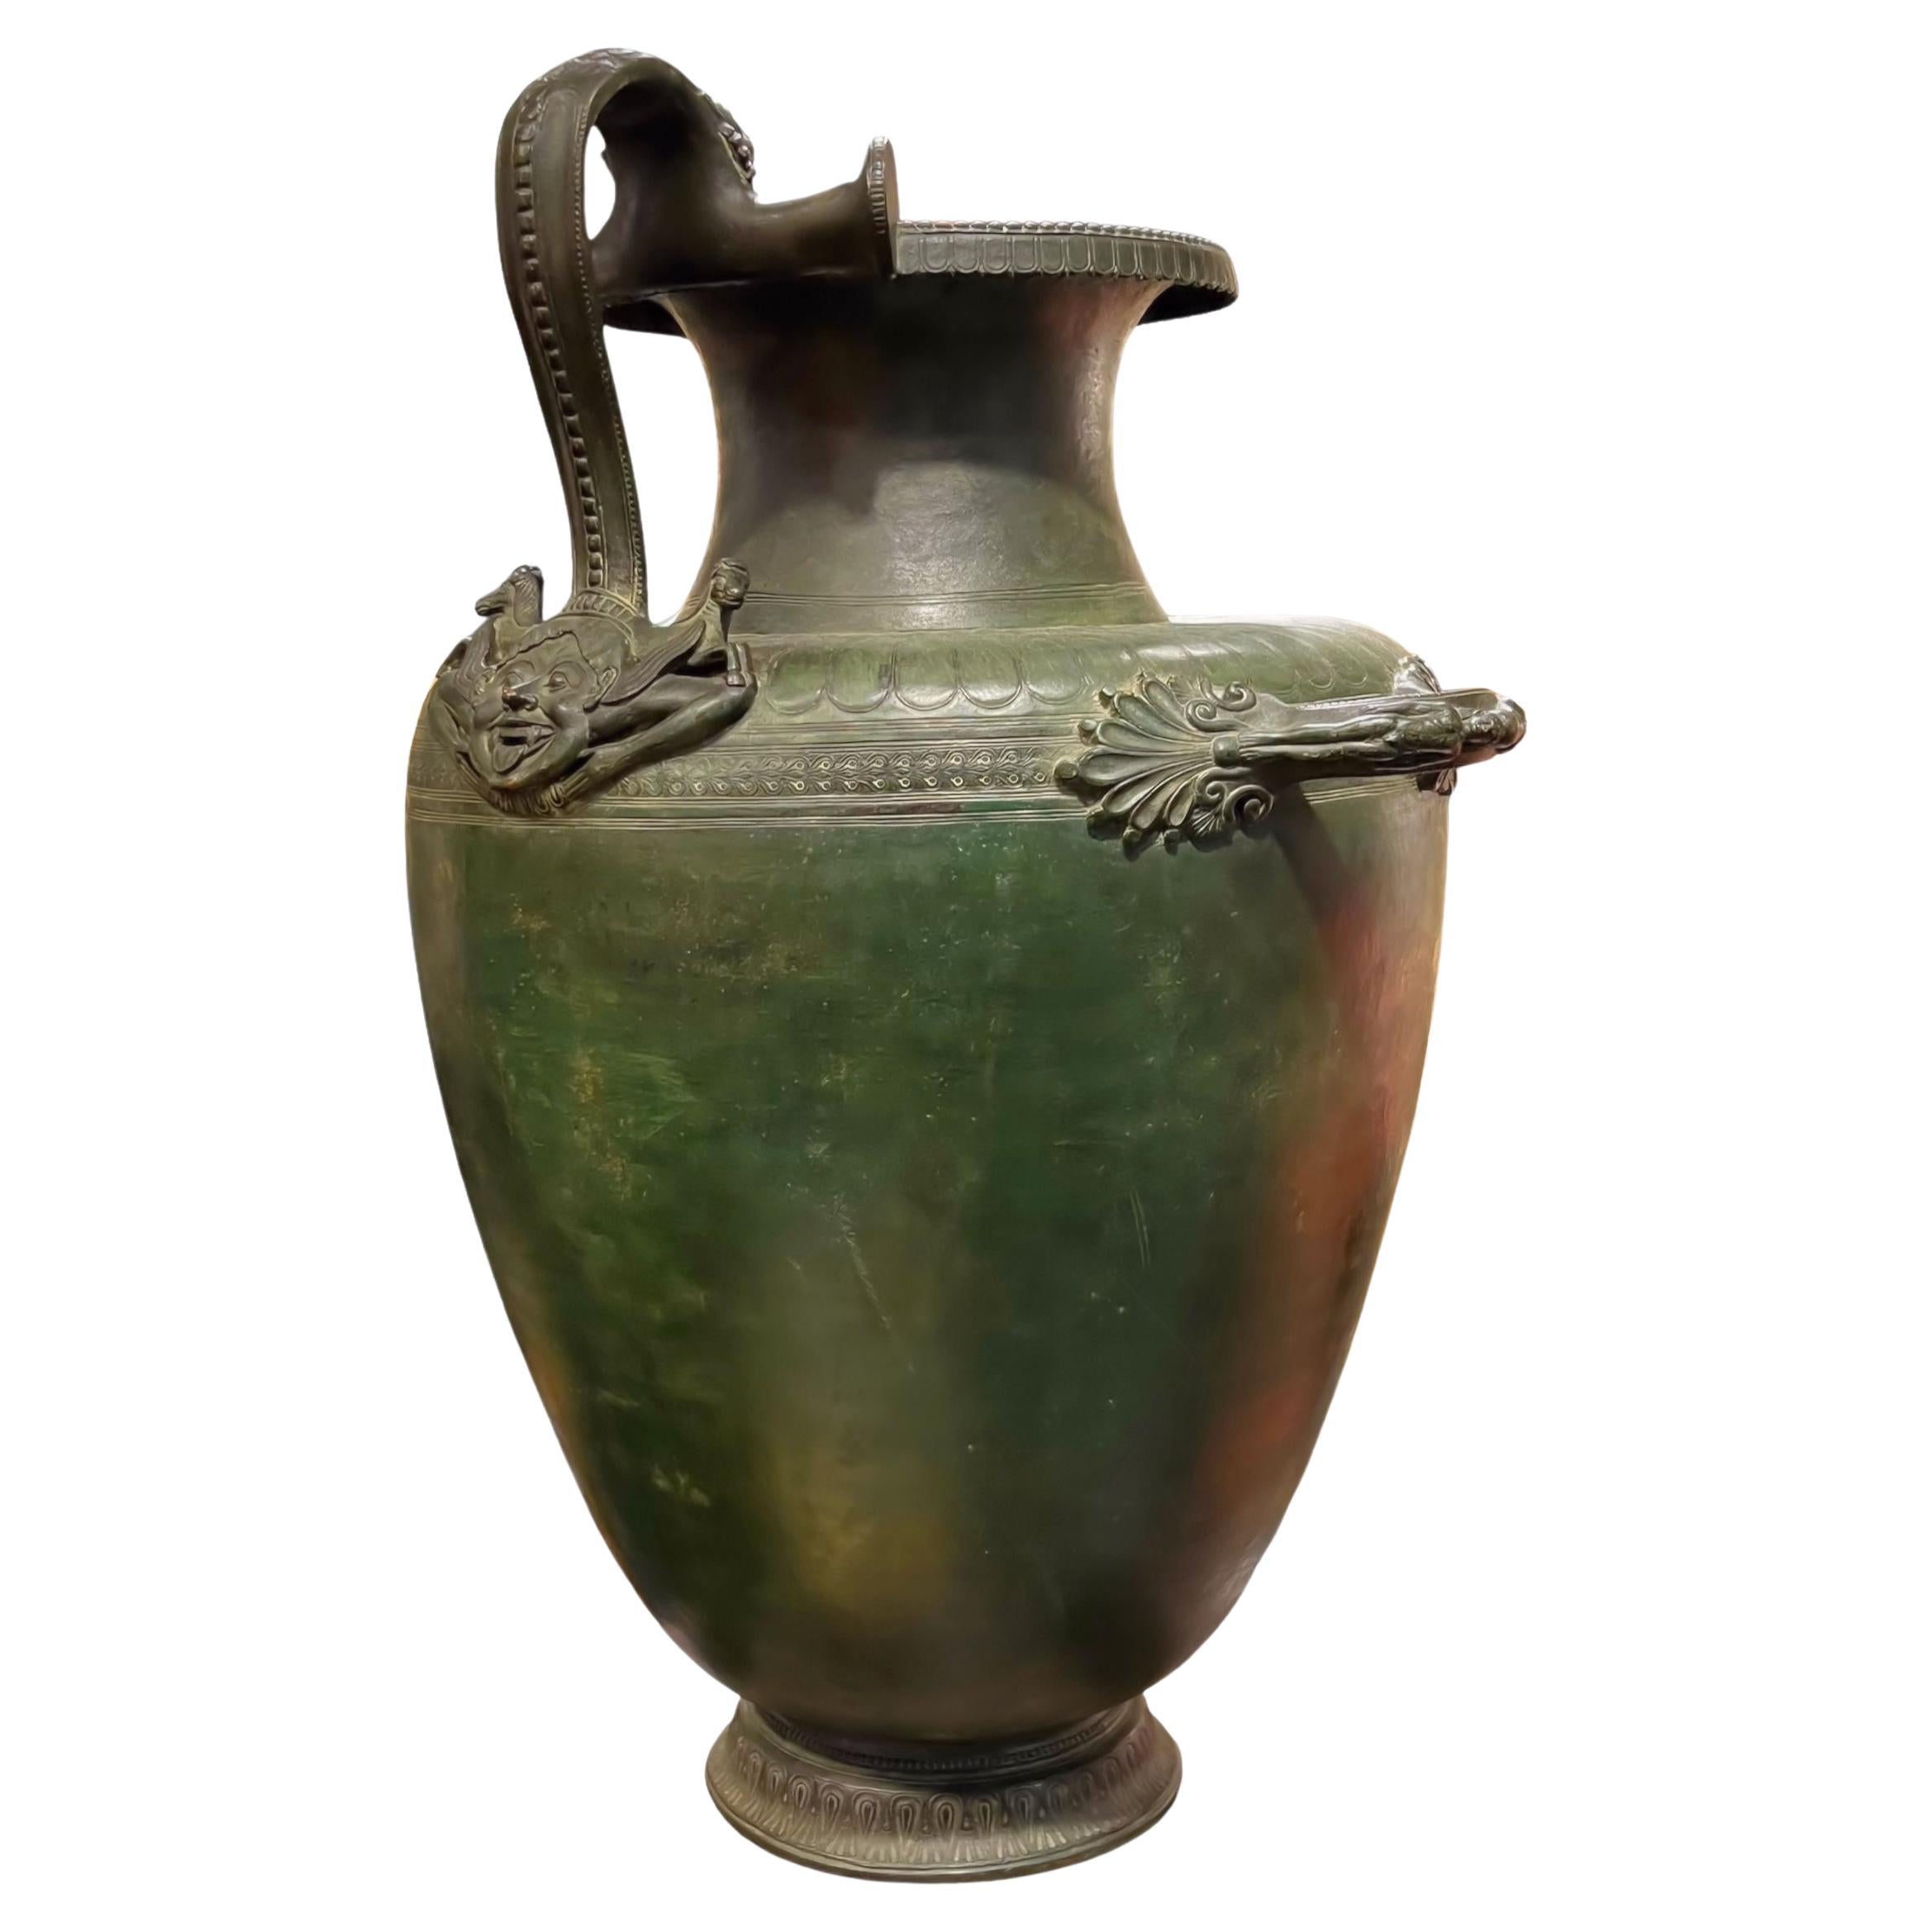 Our antique Grand Tour bronze hydria water jar after the original Greek design, circa 5th century BC, has a verdigris green patina and is finely cast with a winged laughing mask and hippocamps above and handles to the sides.  Possibly from the